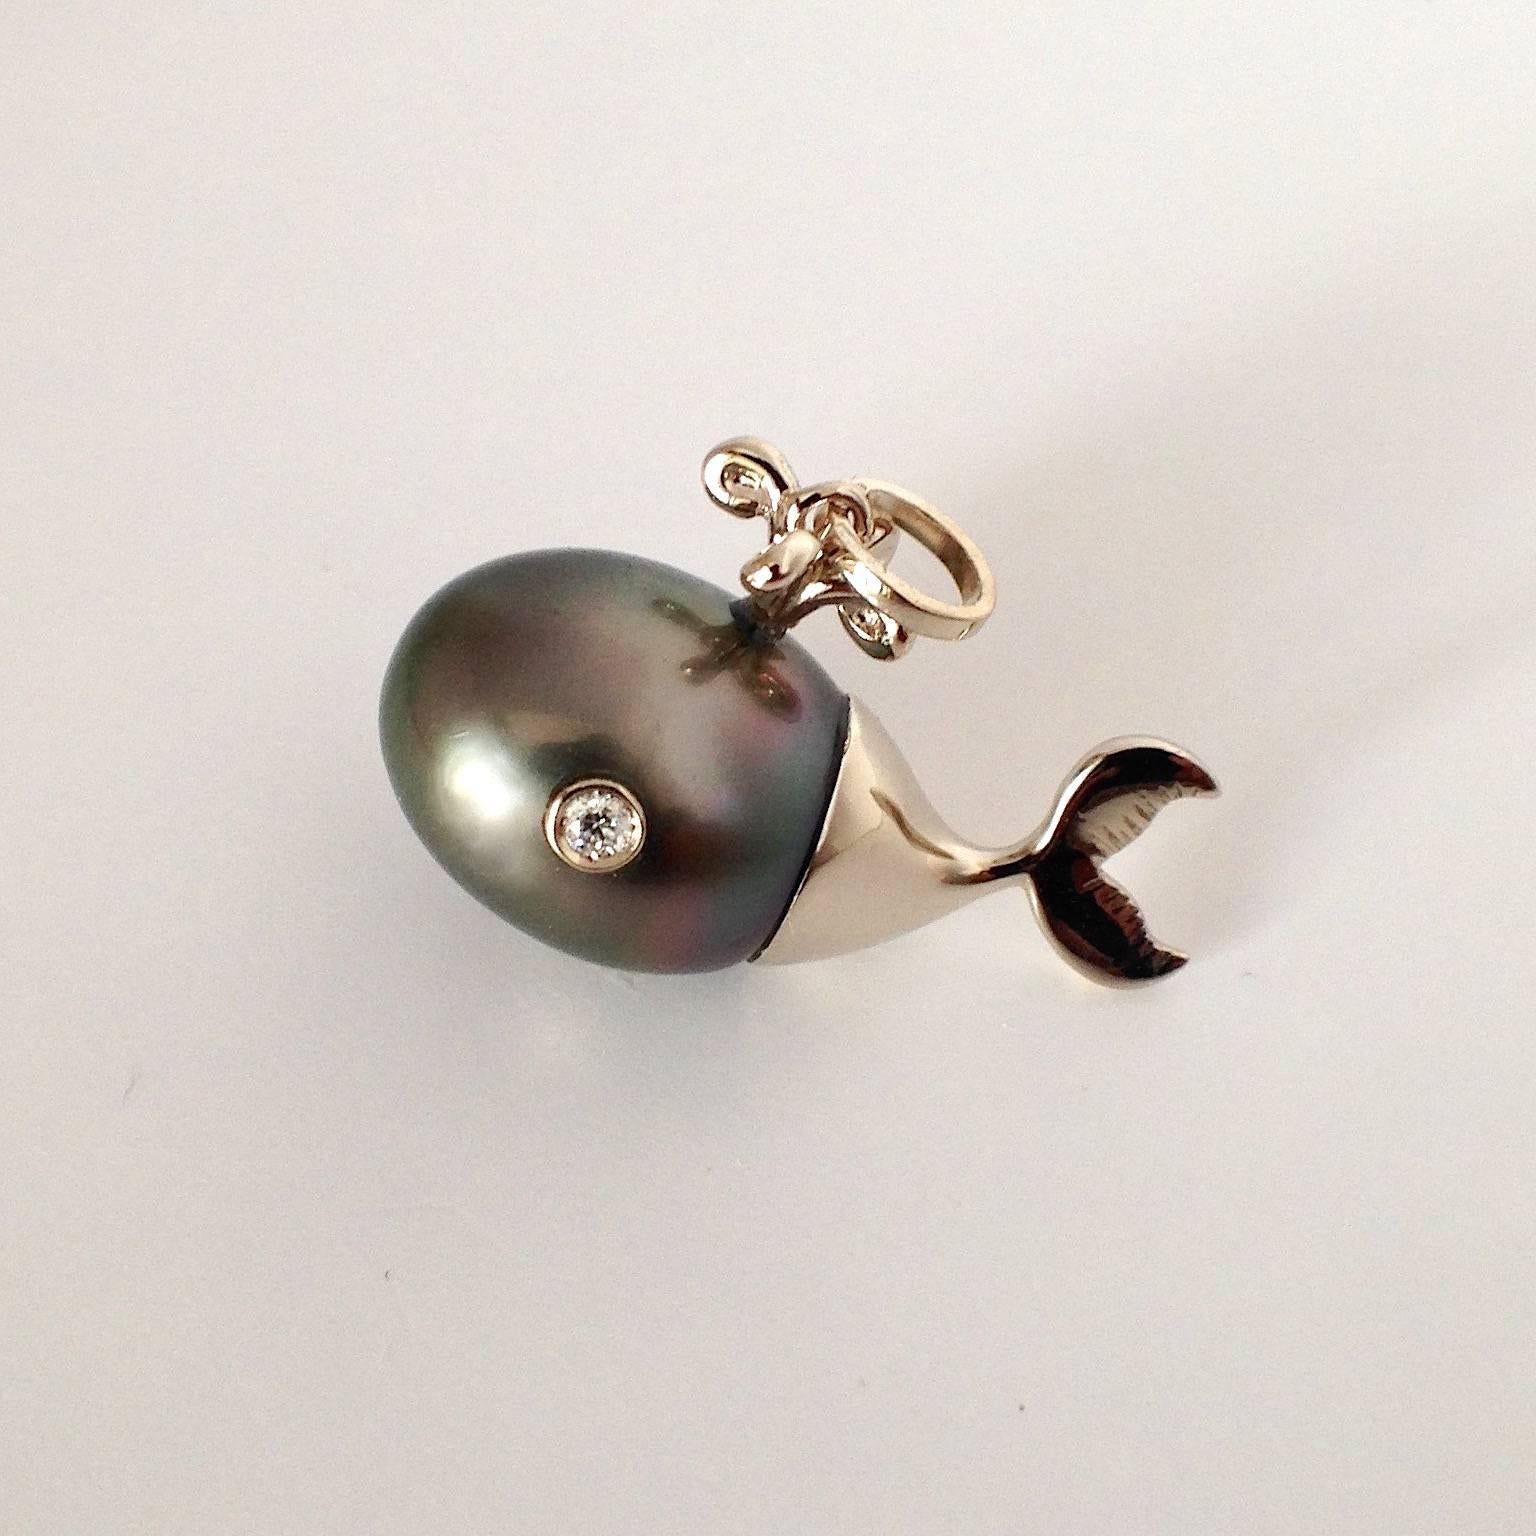 A beautifully hand crafted pendant in white gold in the form of a whale whit two diamond for the eyes, in total 0.07 ct. The Tahiti pearl is oval, about 13x15 mm